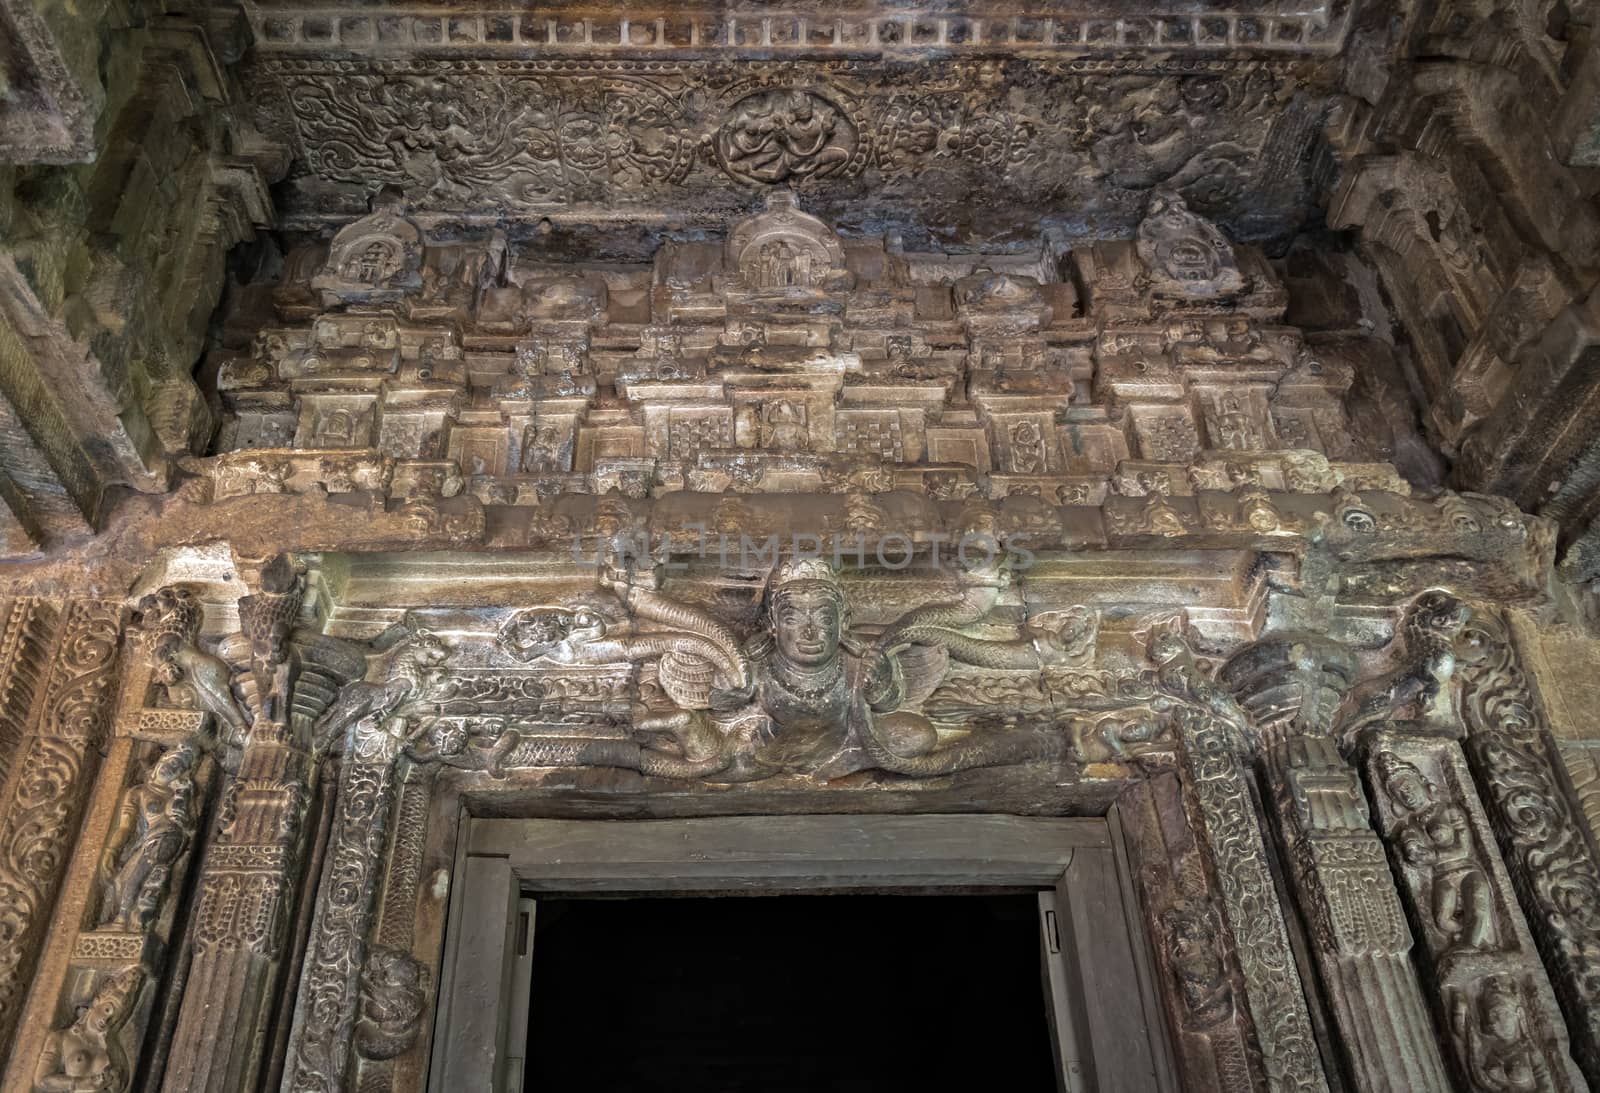 Exquisite carvings on the entrance door of the Durga temple, Aihole, Bagalkot, Karnataka, India. by lalam